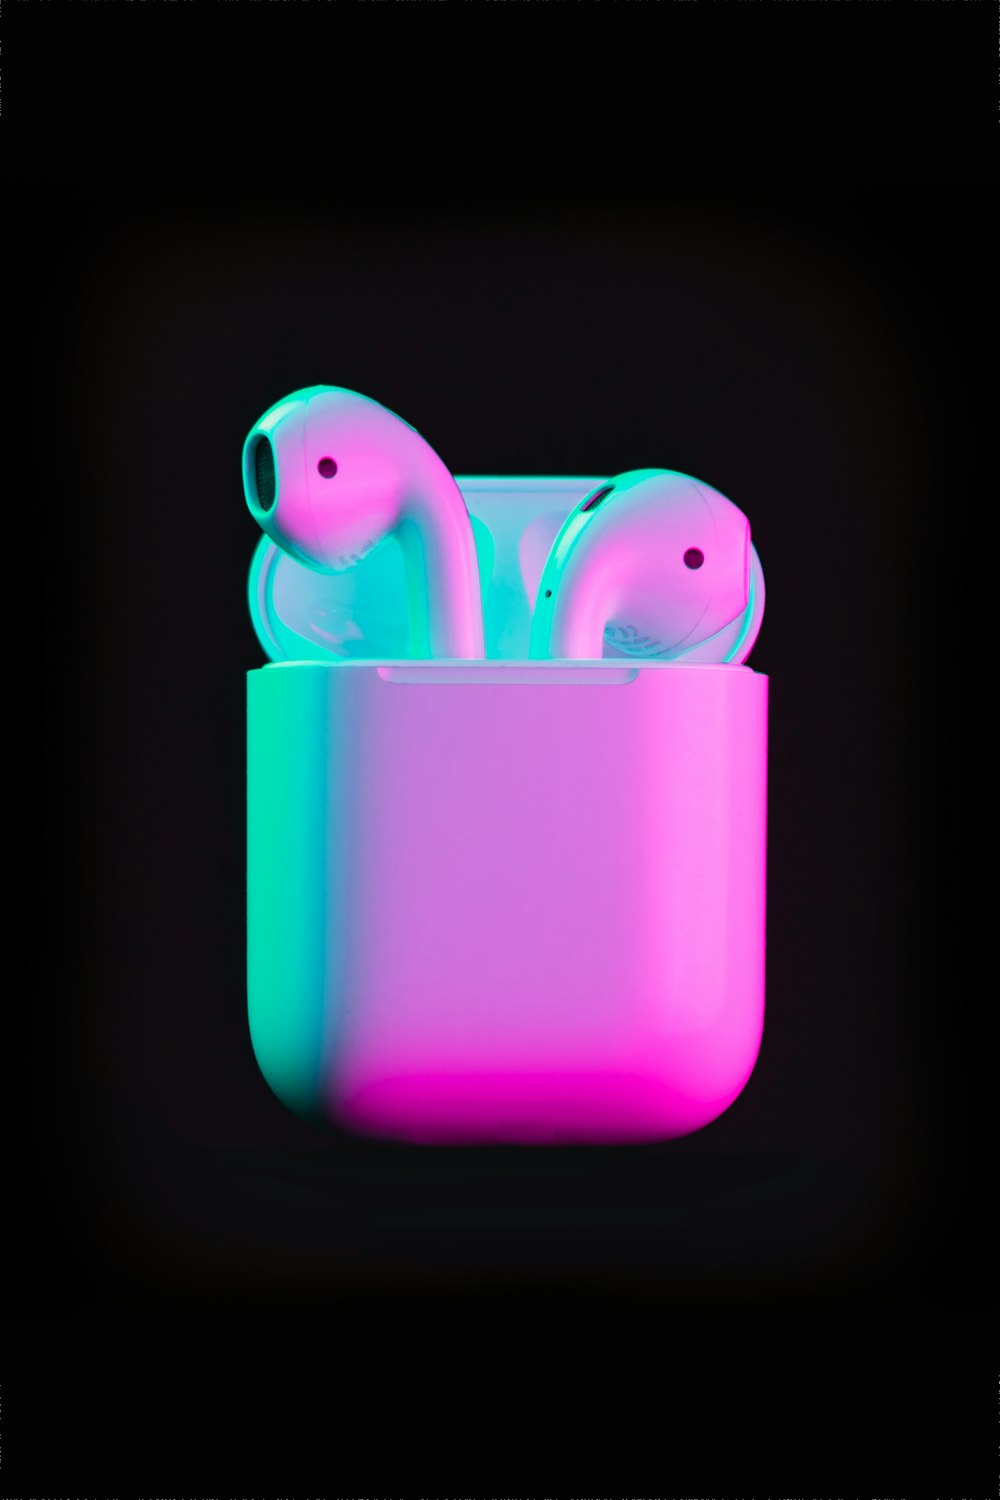 Are Airpods Good for Gaming PCs?